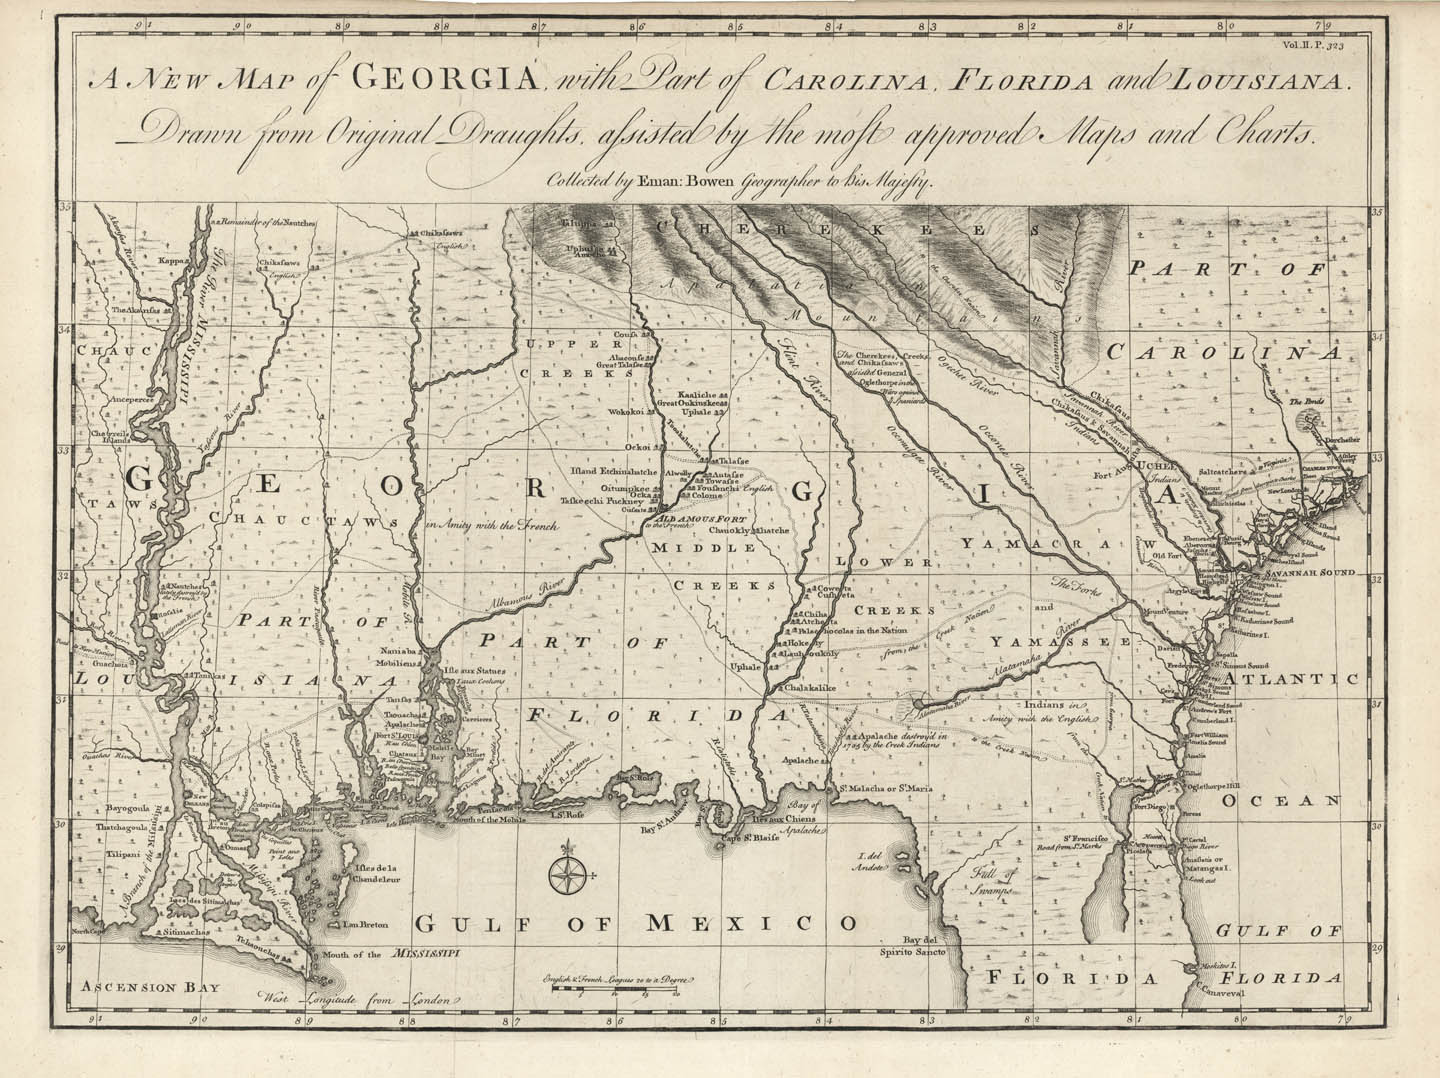 A New Map of Georgia, with Part of Carolina, Florida and Louisiana. Drawn from Original Draughts, assisted by the most approved Maps and Charts Collected by Eman: Bowen. Geographer to his Majesty.